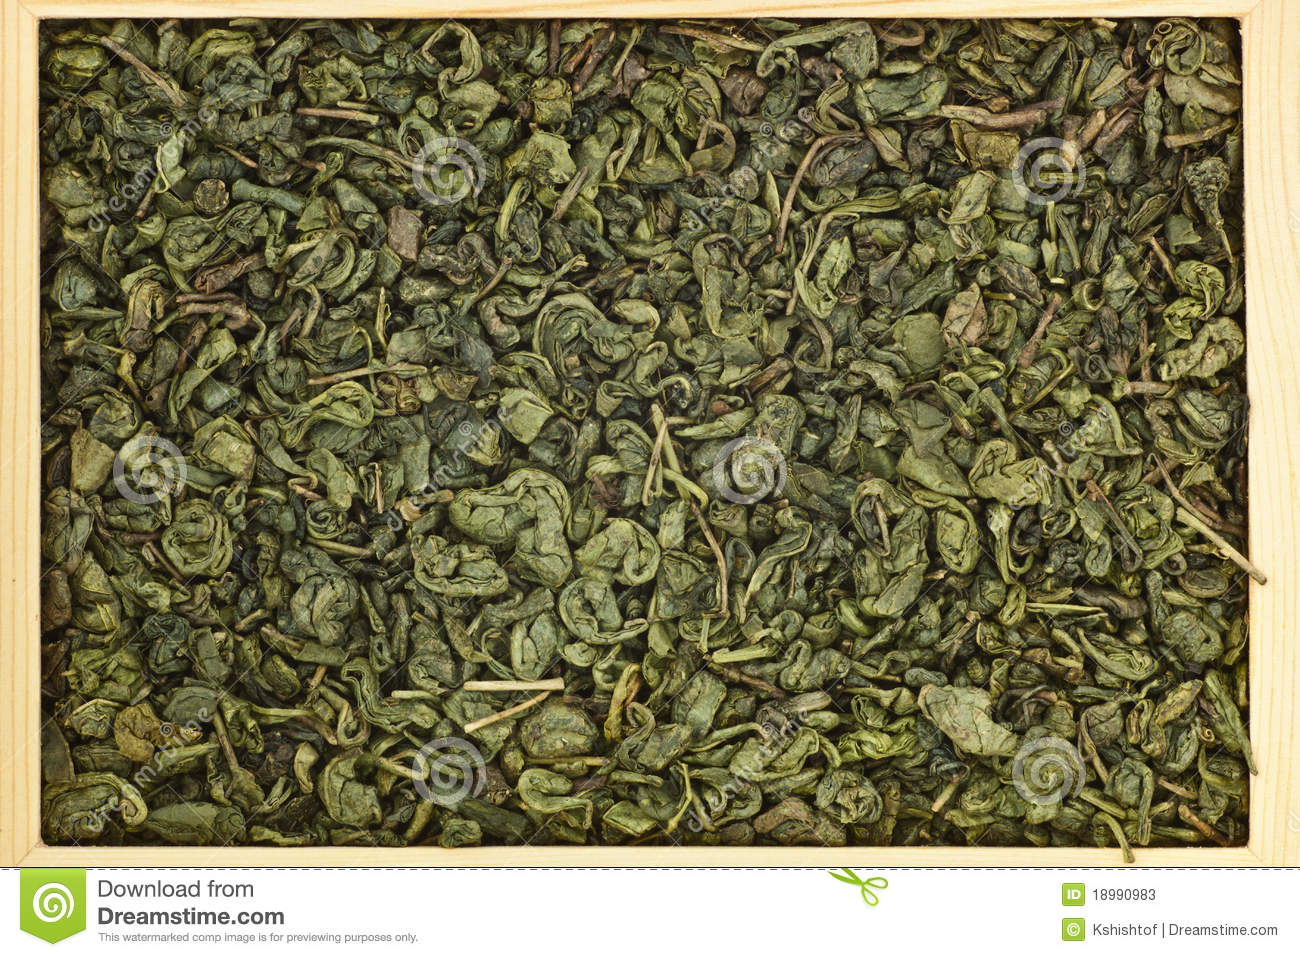 Leaves Of Chinese Green Tea In Wooden Box As A Background